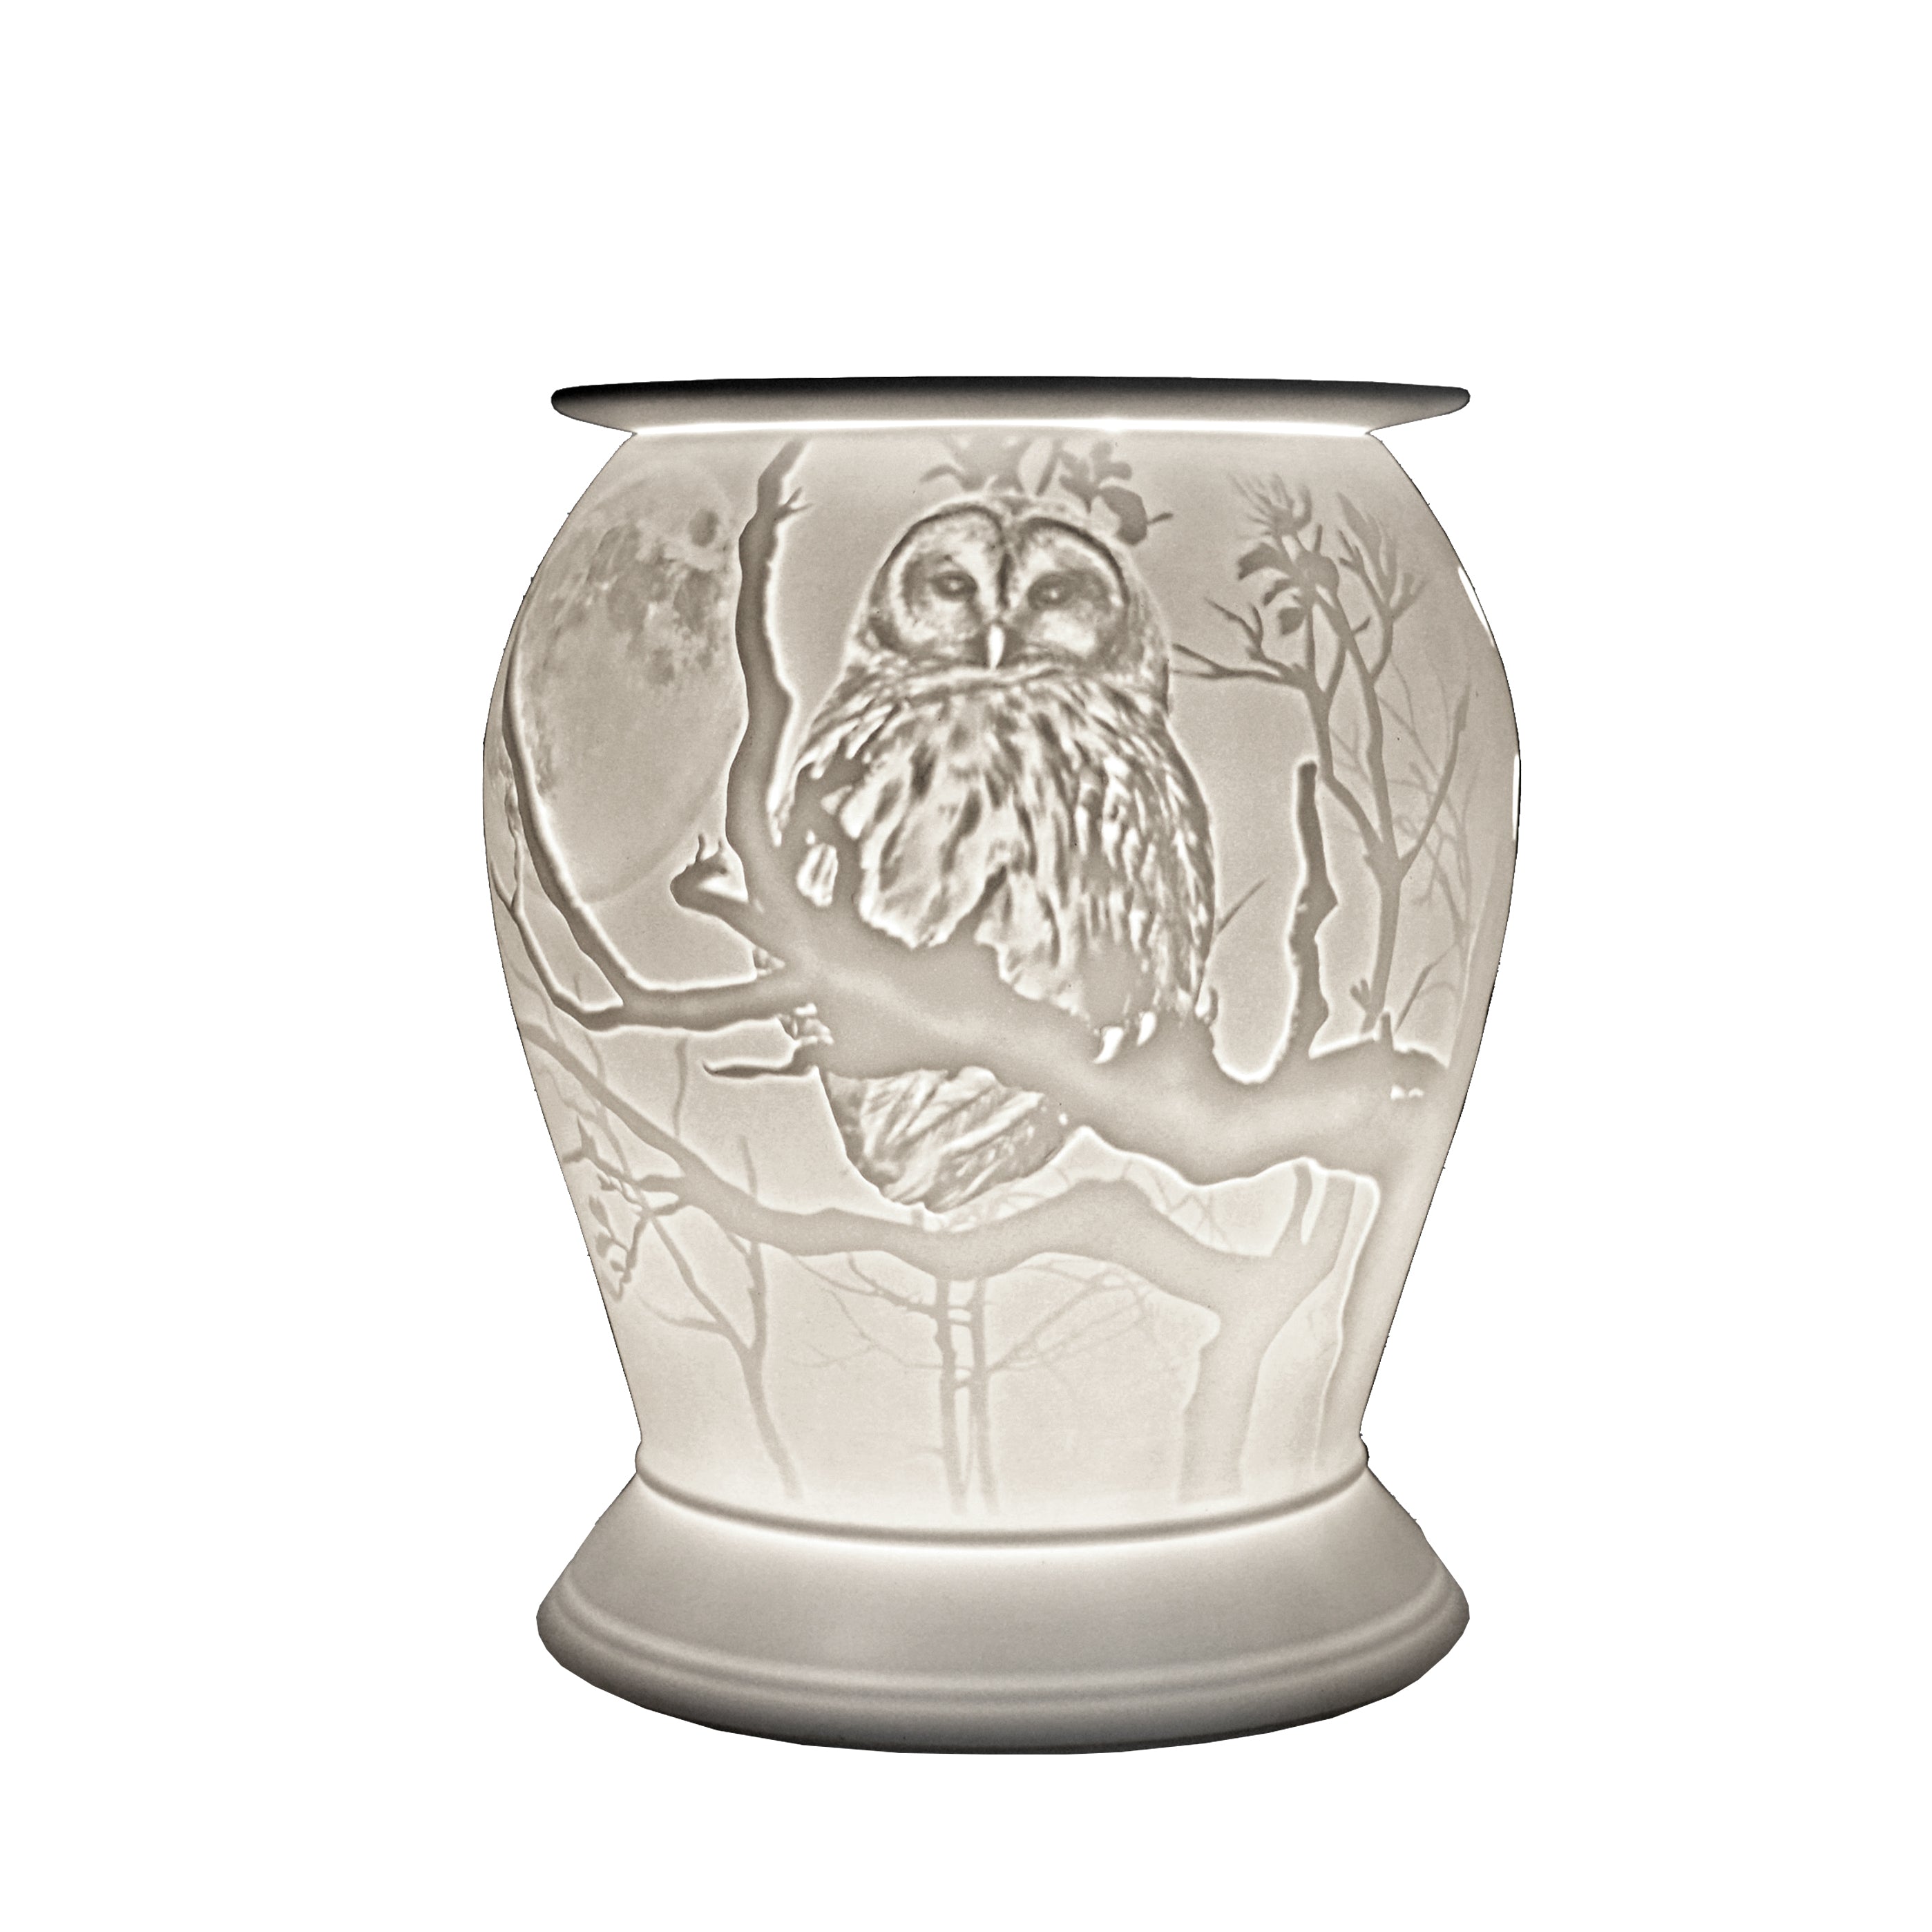 The porcelain material on this Wax Melt Burner allows bright light to shine through it, providing the opportunity to create this stunning owl design. This is done by crafting images out of thicker and thinner sections of the porcelain, allowing for detailed shadowing and a 3D effect. The porcelains elegant look will fit perfectly in any room is available in a range of designs and two different shapes.